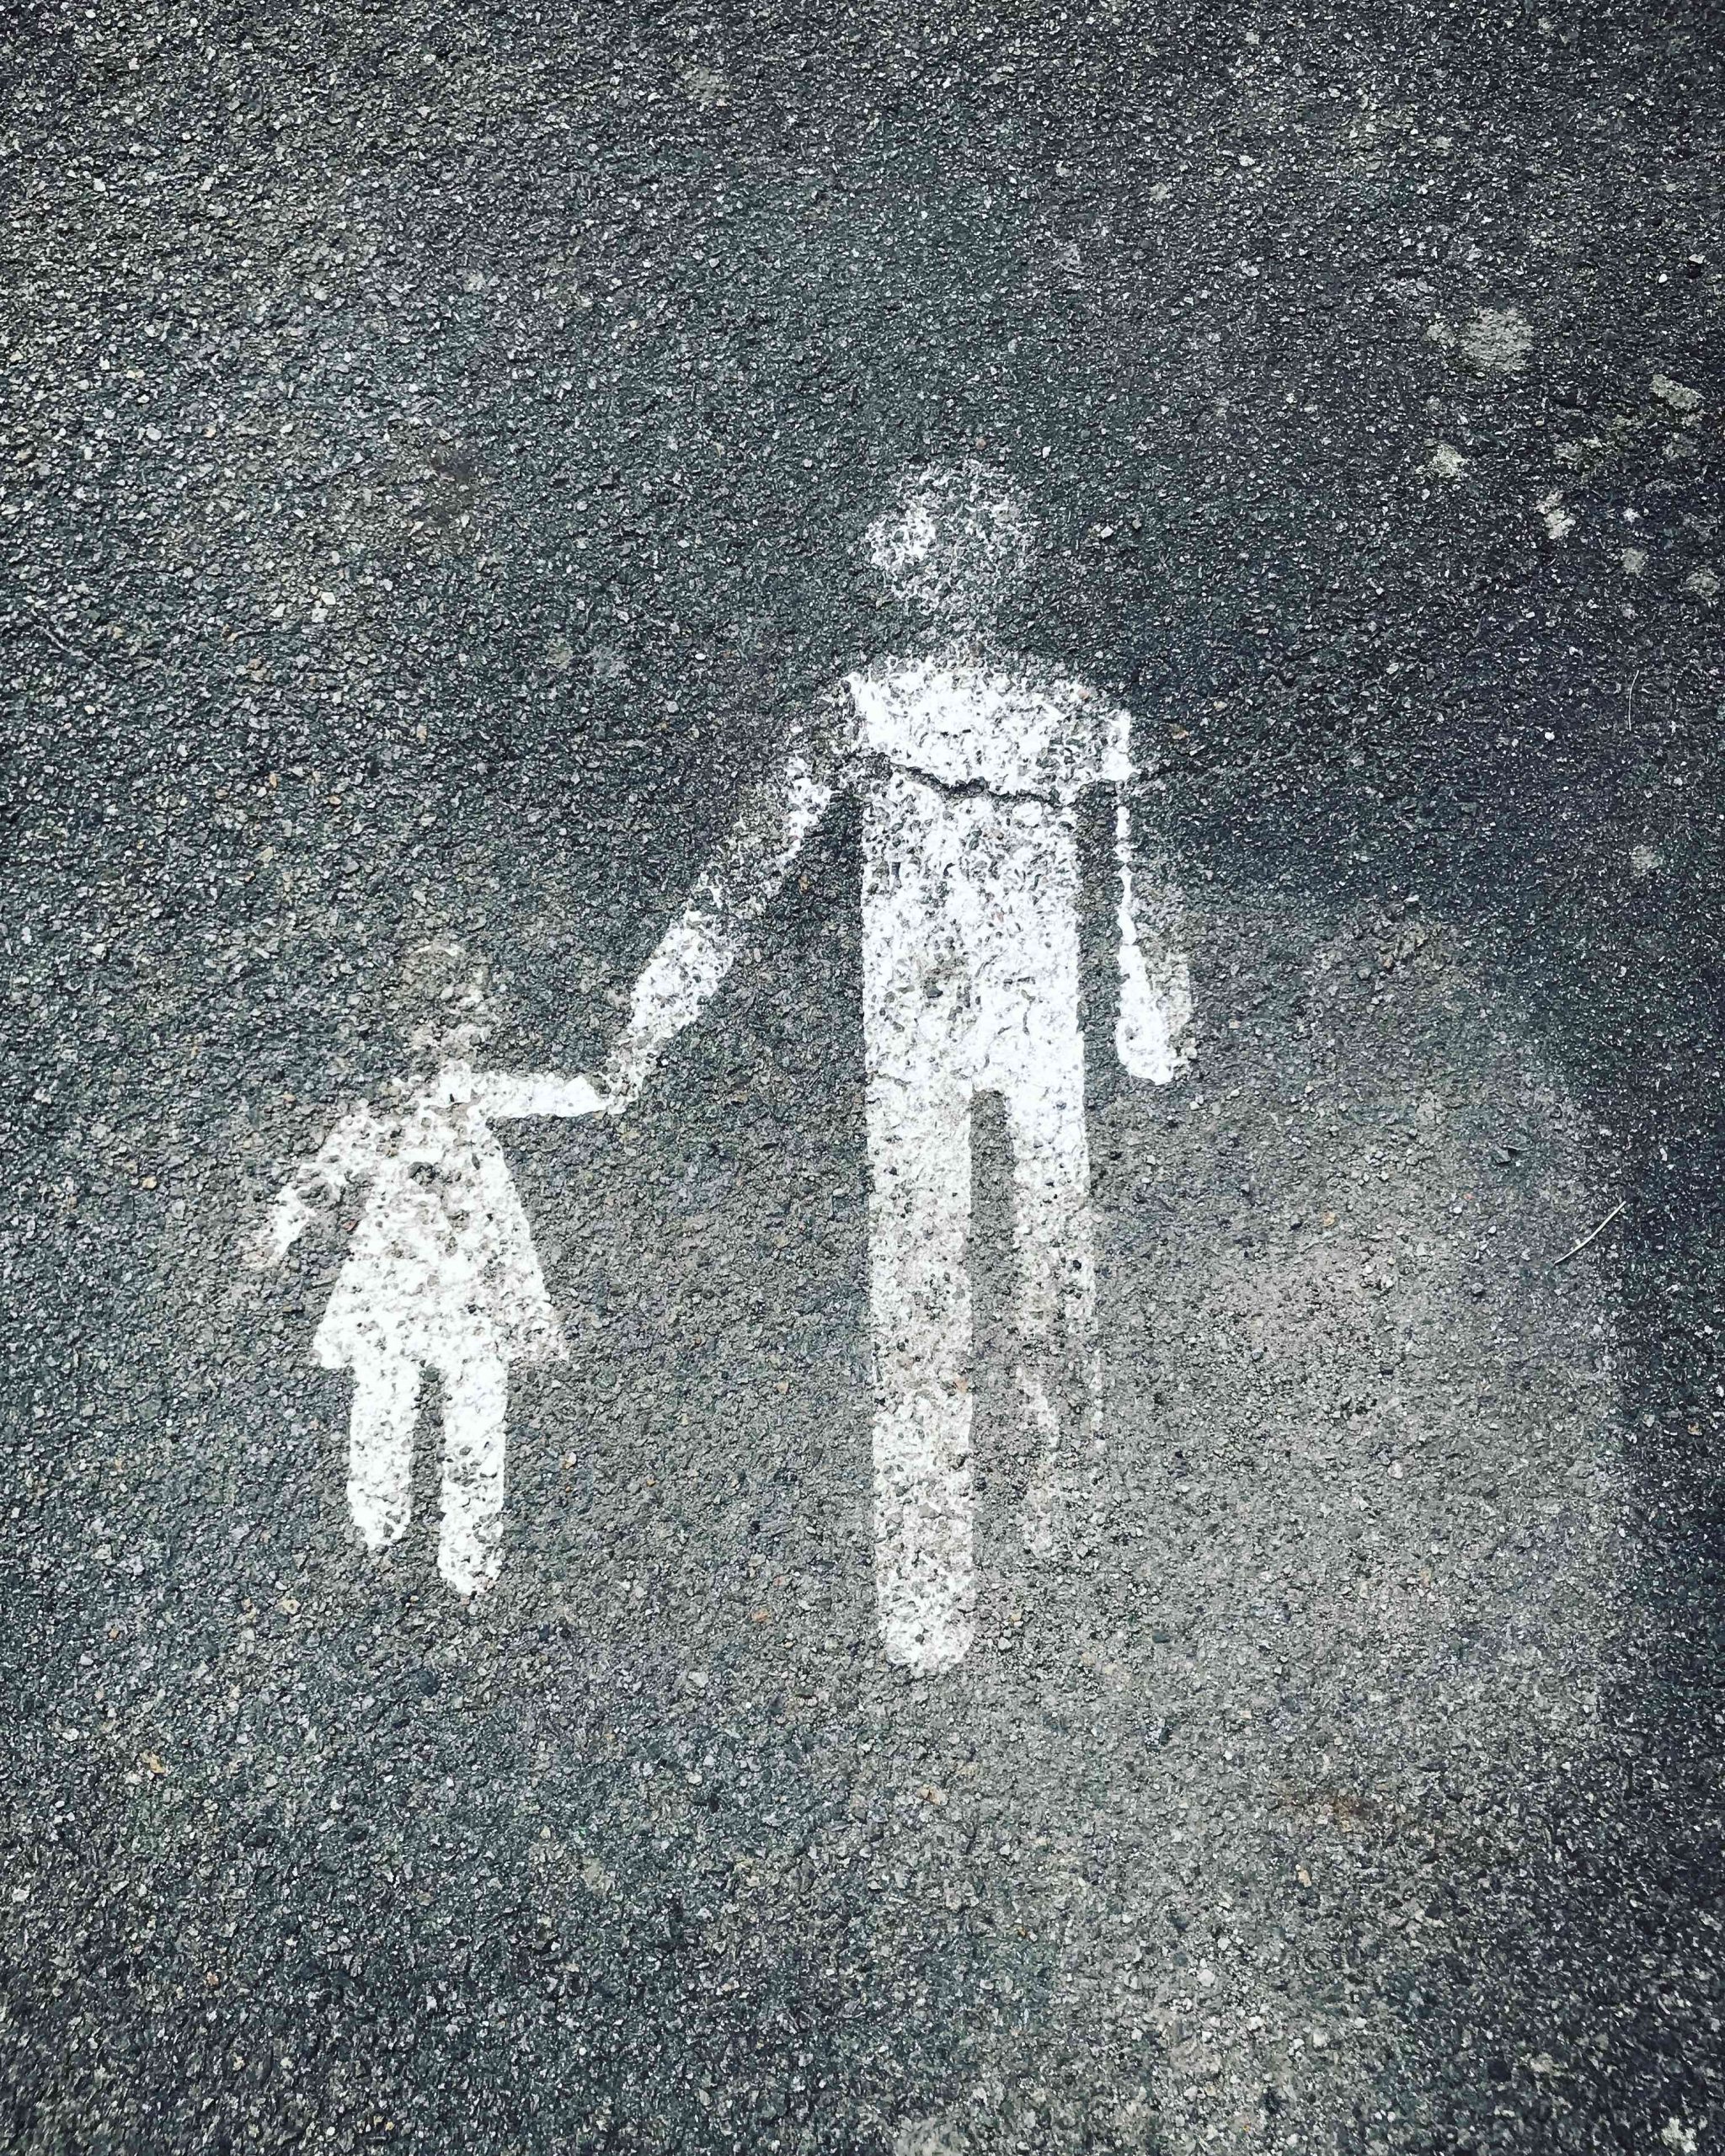 Photograph of a floor surface painted with a white graphic of a small person in a dress holding hands with a taller person in trousers